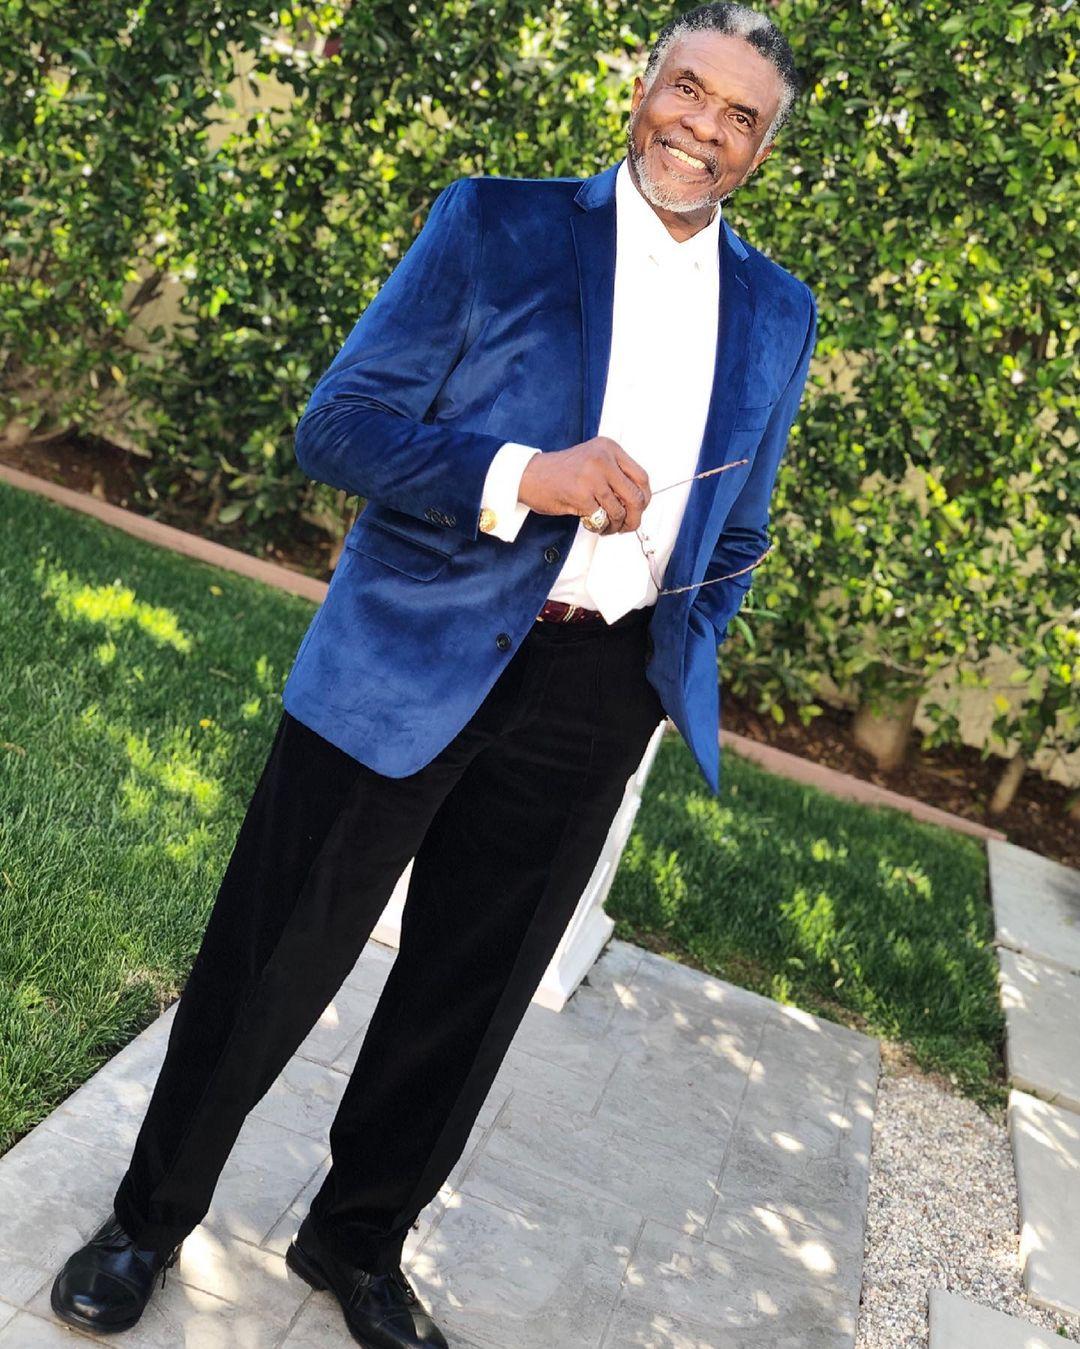 A lovely photo showing Keith David in a blue suit paired with a black pant and white inner T-shirt.